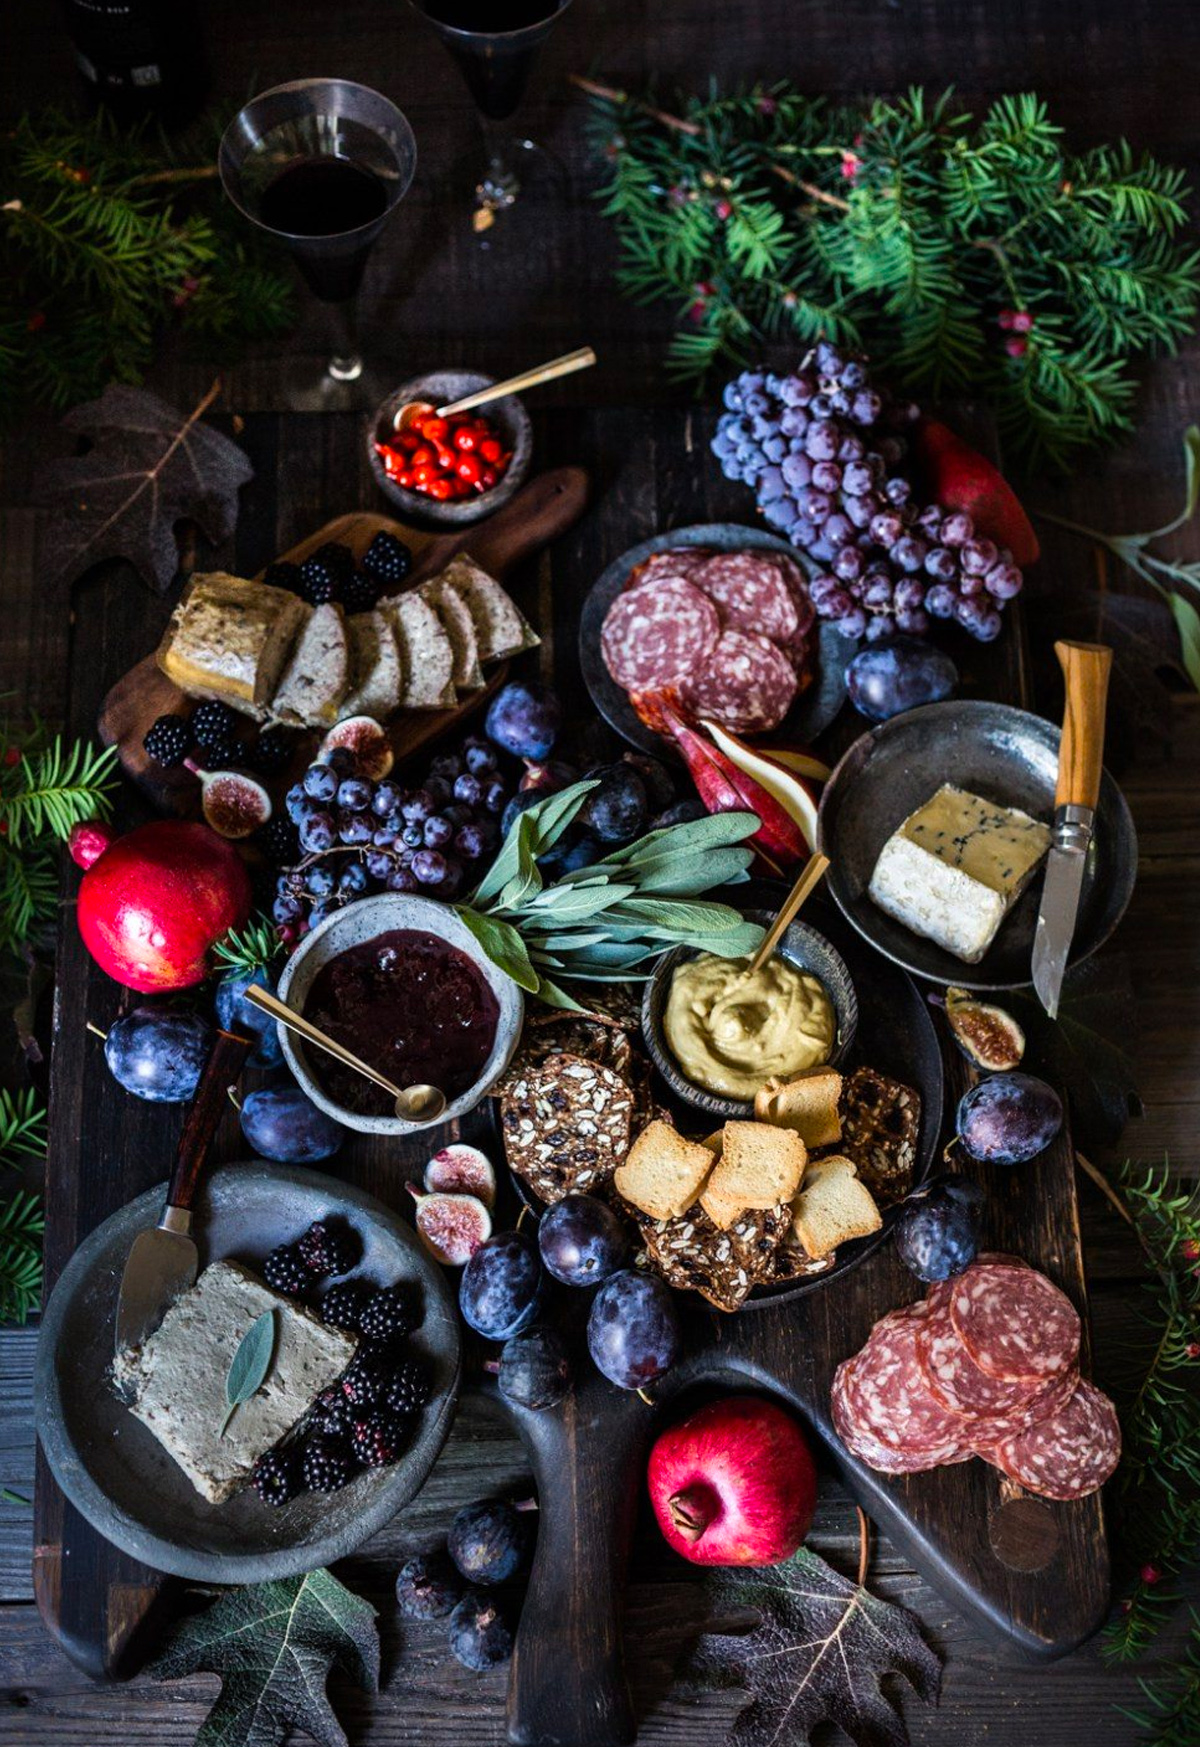 Grapes, meats, berries, pears, cheese, figs, and crackers fill Honest Cooking's winter board.